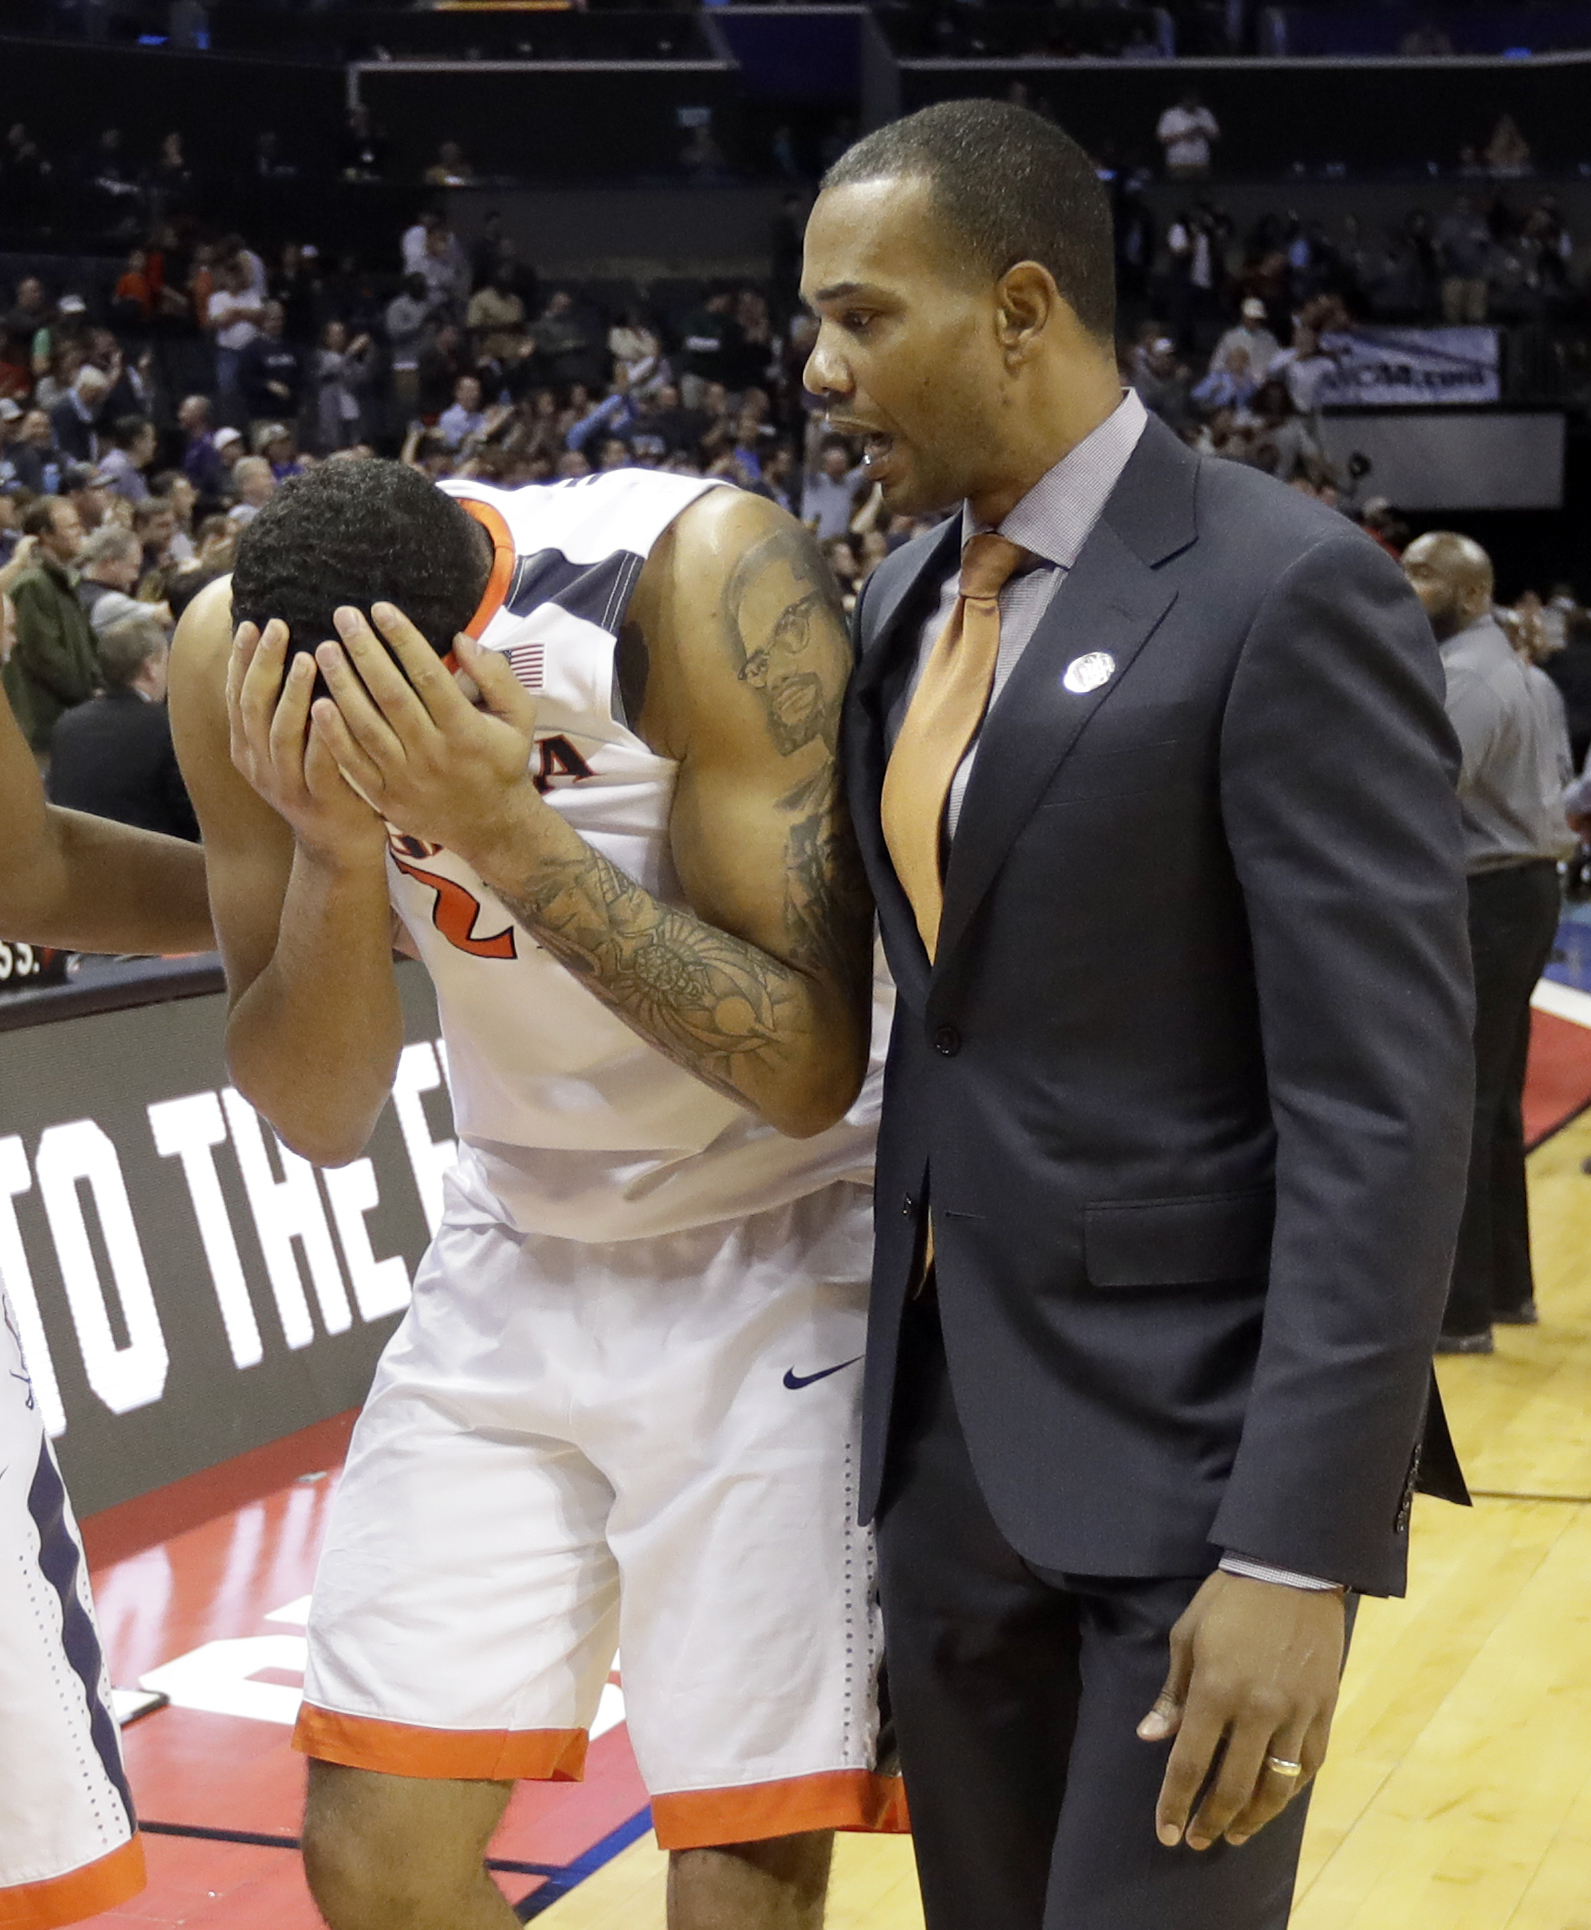 History? Virginia's got plenty. And soon, maybe a title